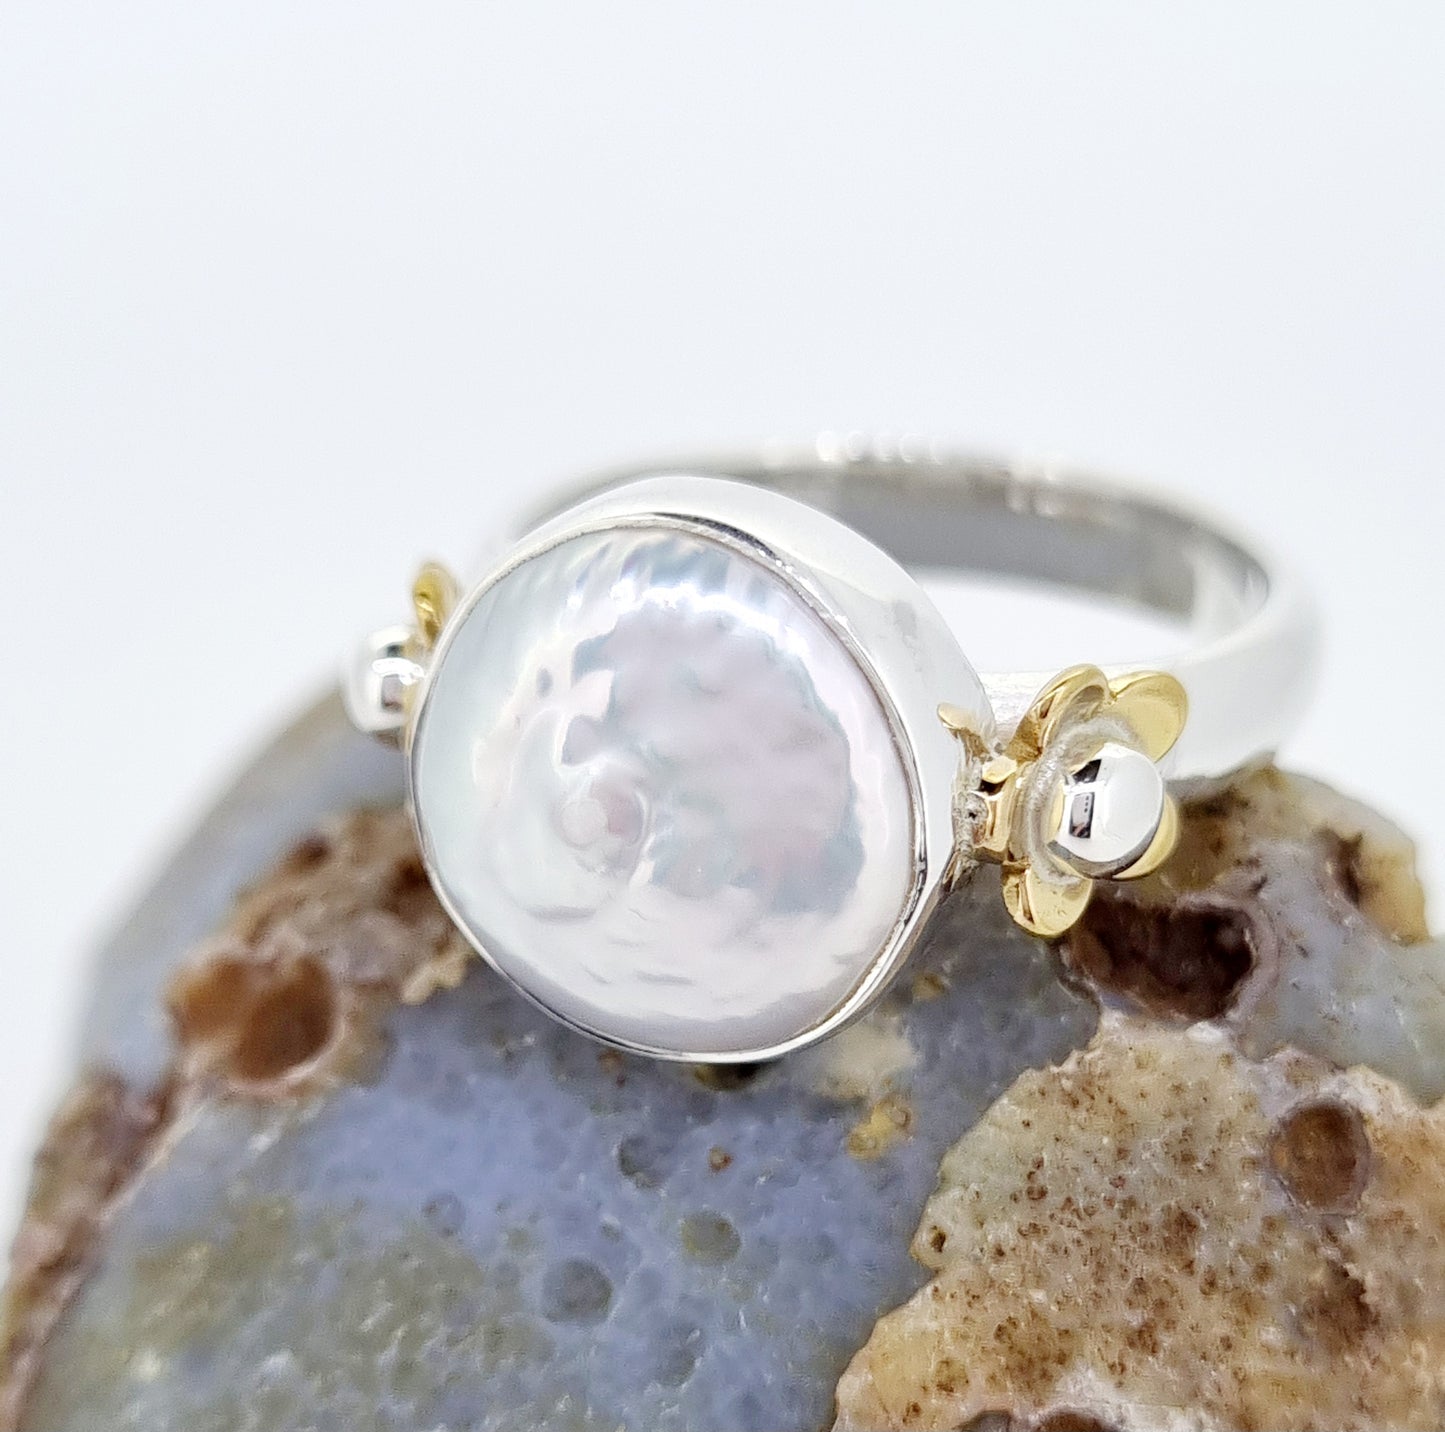 Pond Of Baroque Pearl In 925 Sterling Silver With A Splash Of Gold Ring.